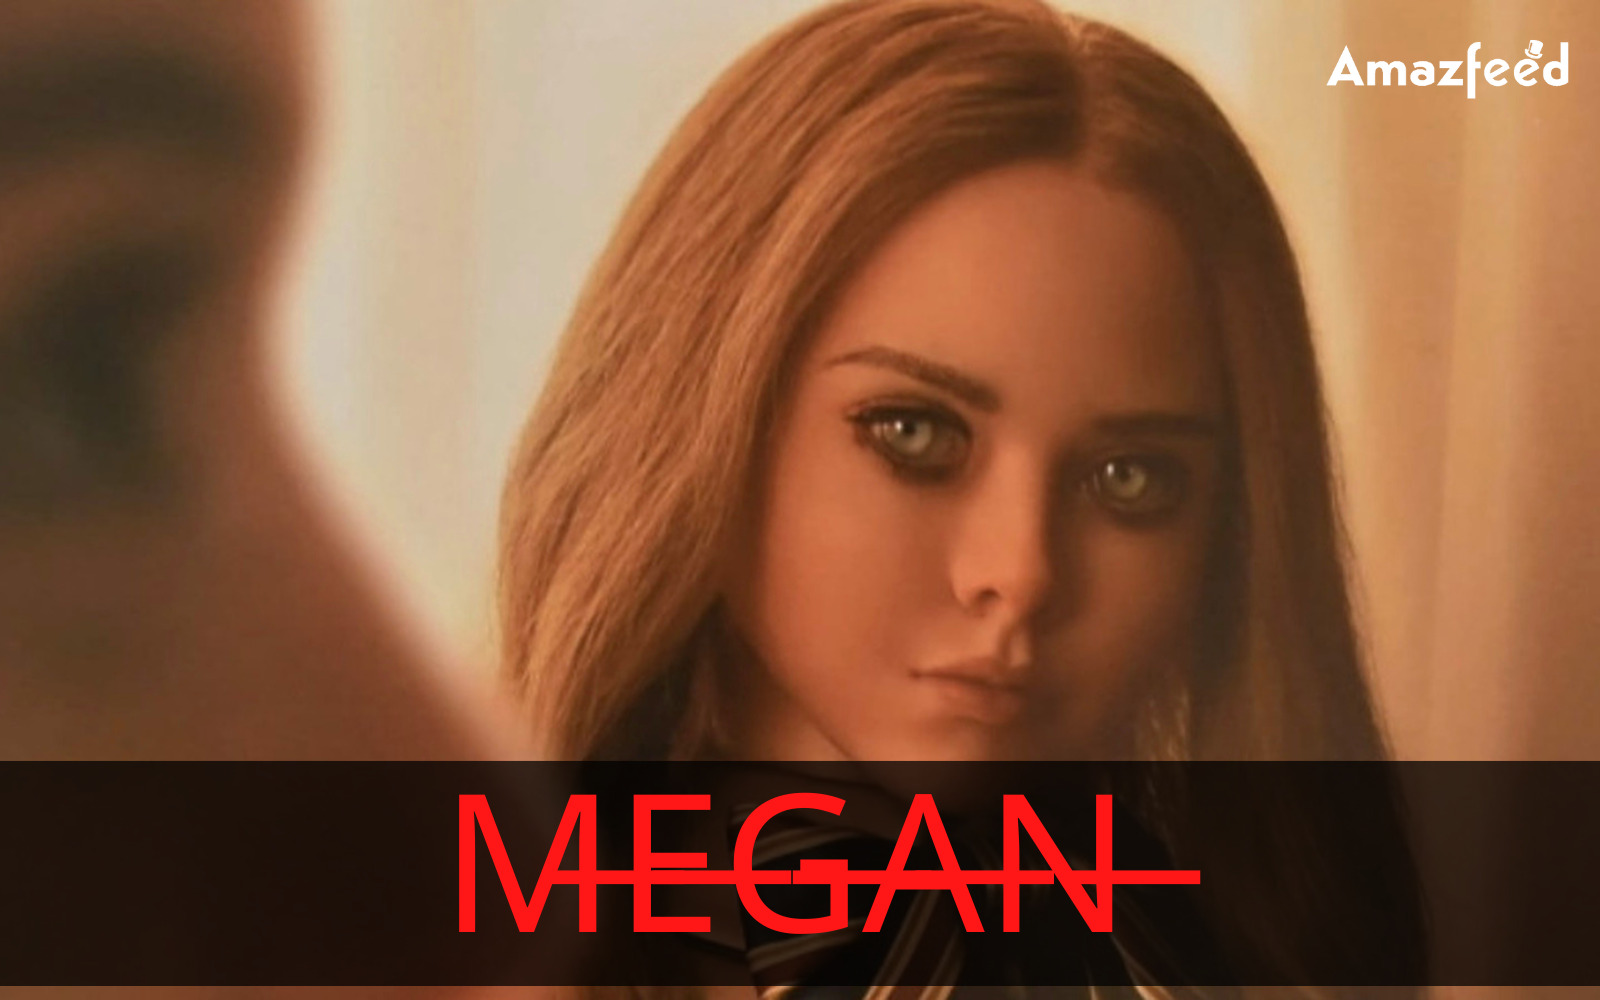 Megan Cast and Character Archives » Amazfeed